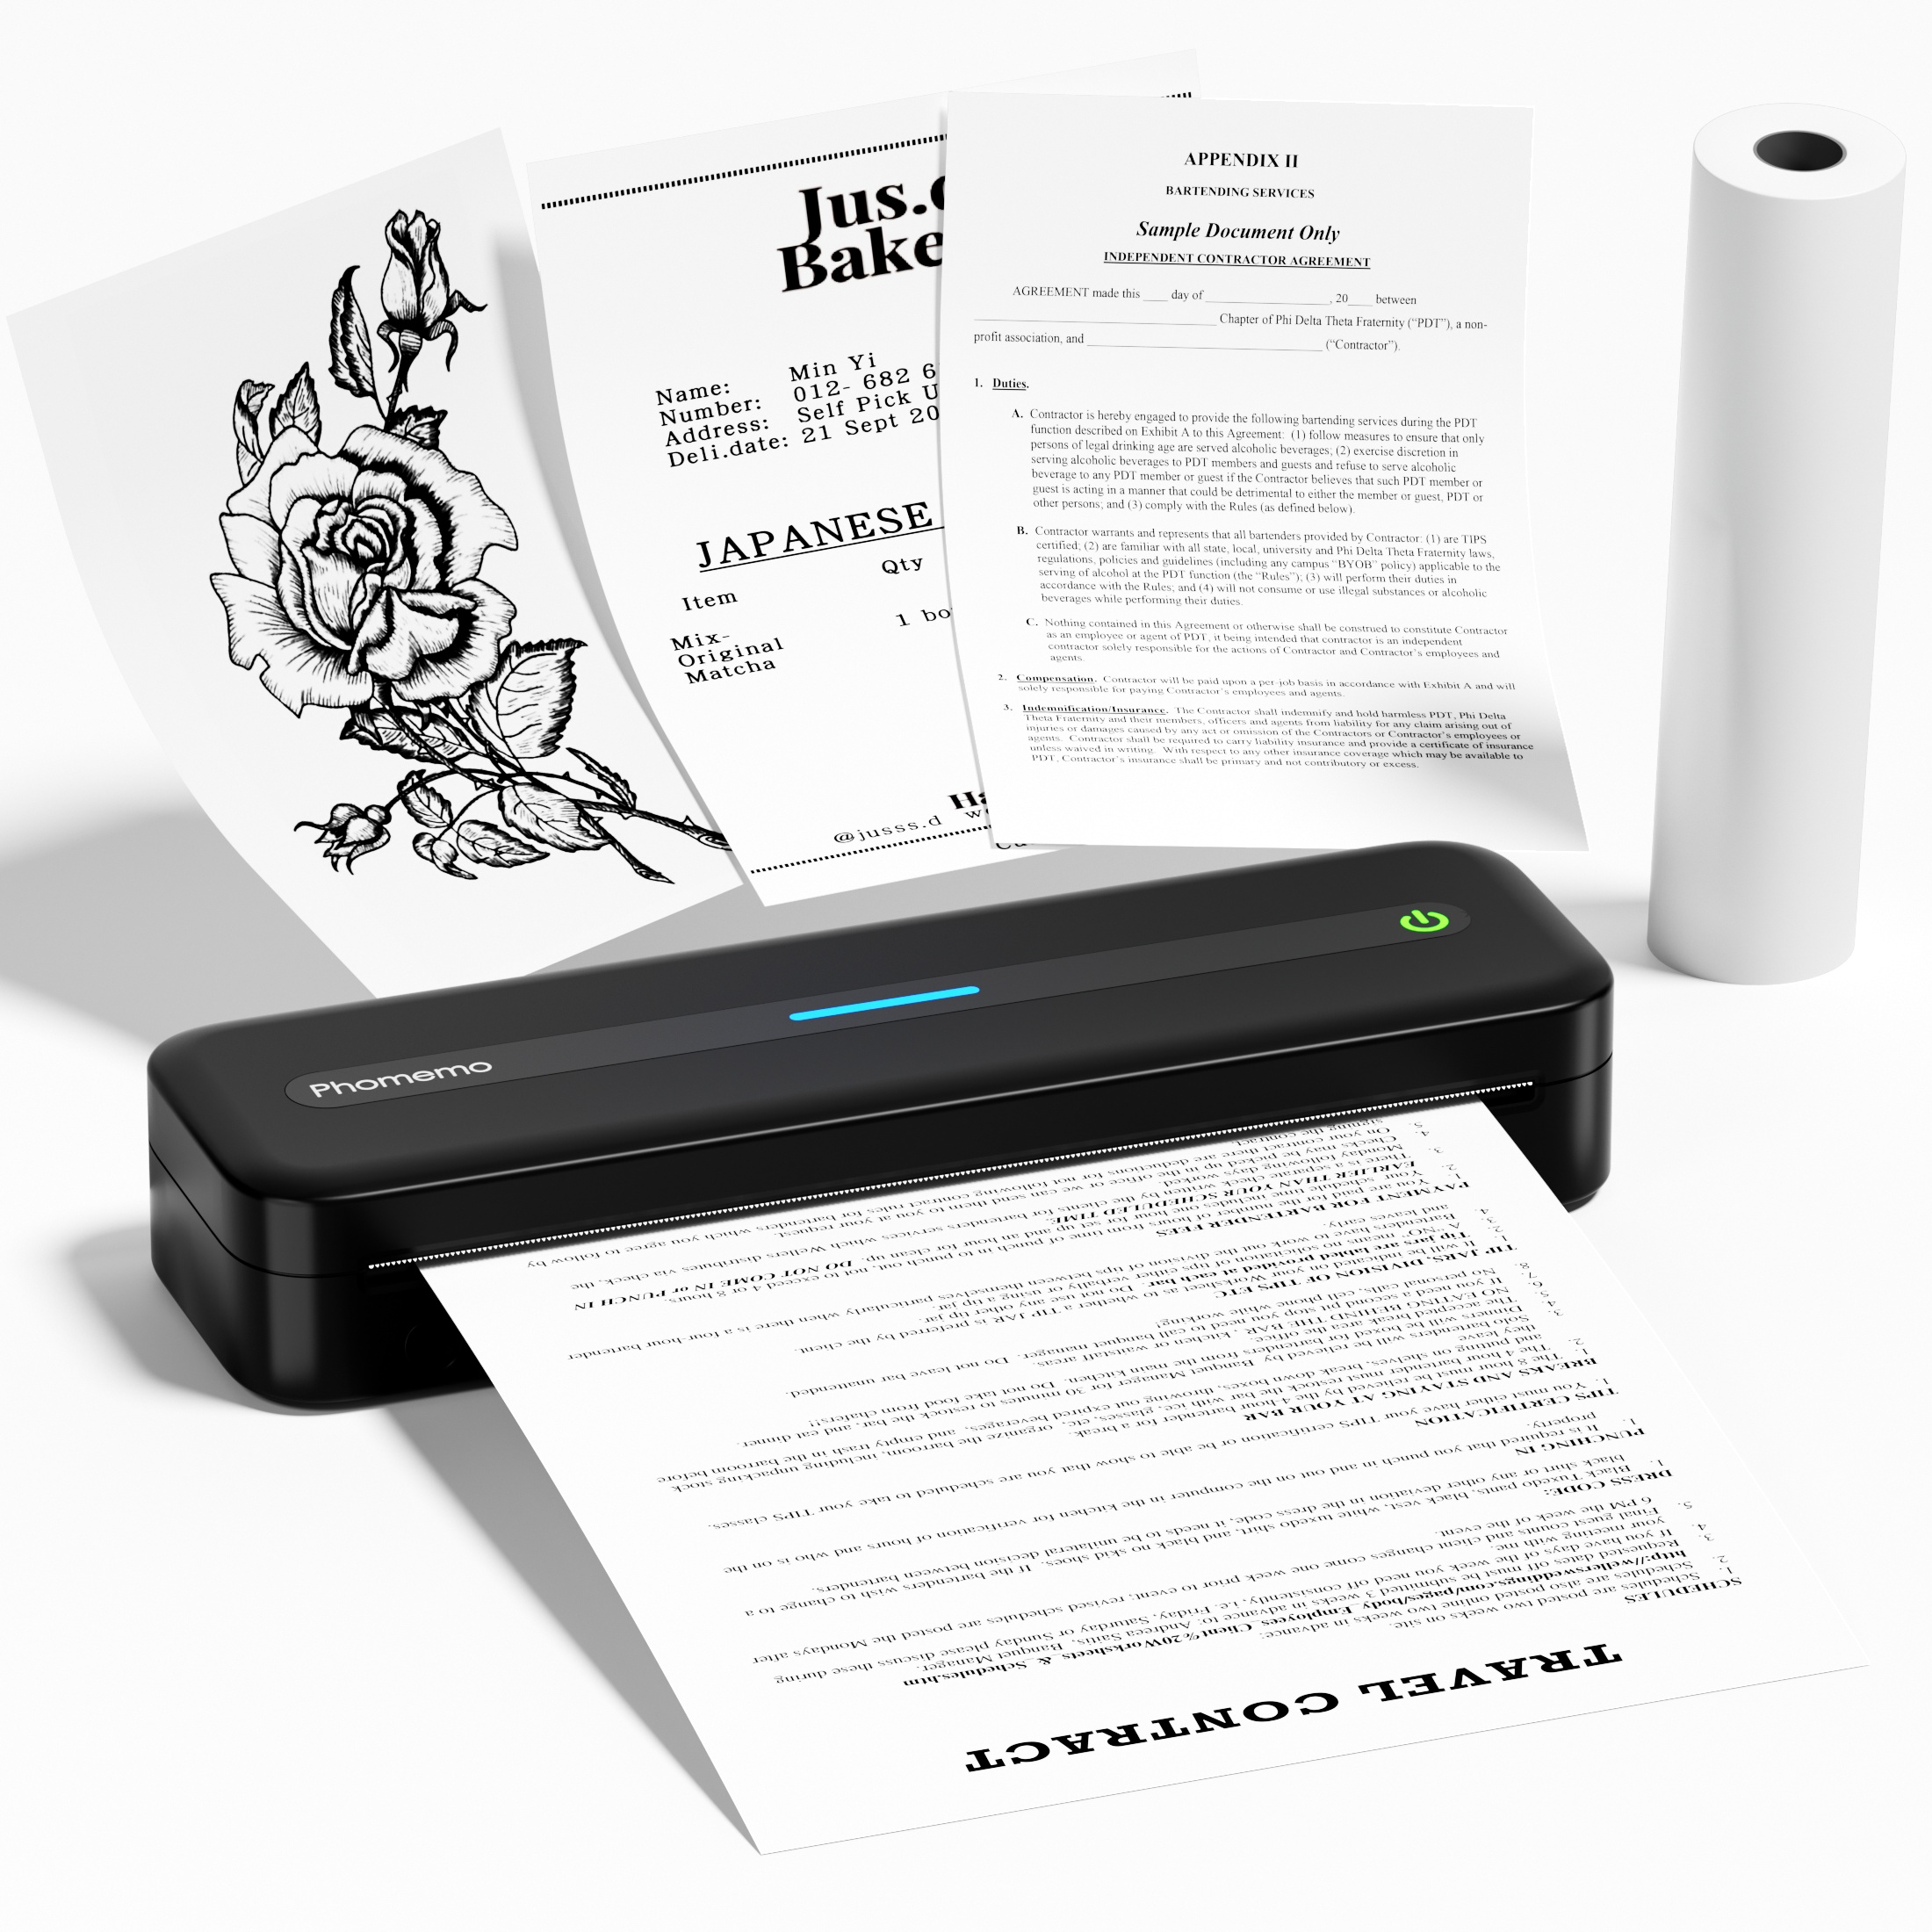  Itari Portable Printers, Wireless Printer, Bluetooth Printer  300DPI Mobile Printer for 8.5x11 US Letter & A4 Printer Paper, Small Printer  Compatible with Mobile & Laptop for Travel,Office,Home,White : Office  Products